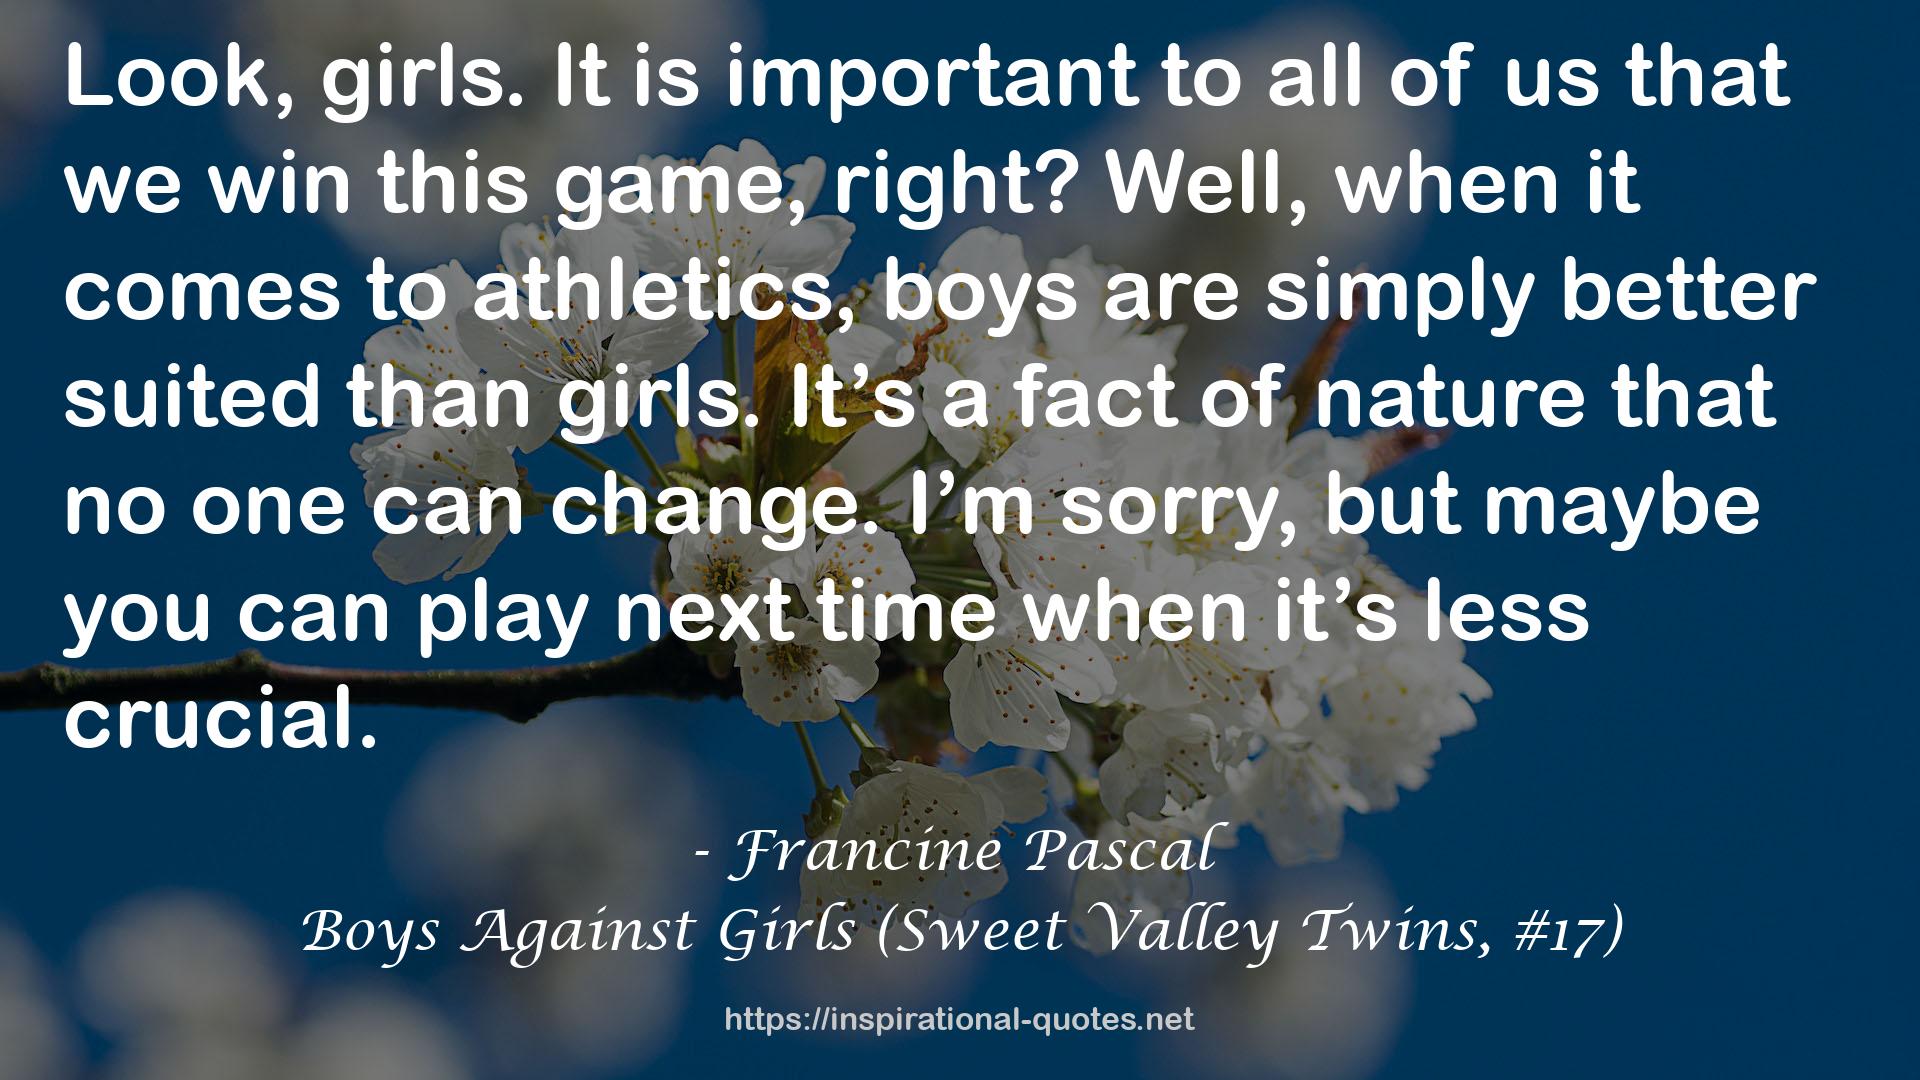 Boys Against Girls (Sweet Valley Twins, #17) QUOTES